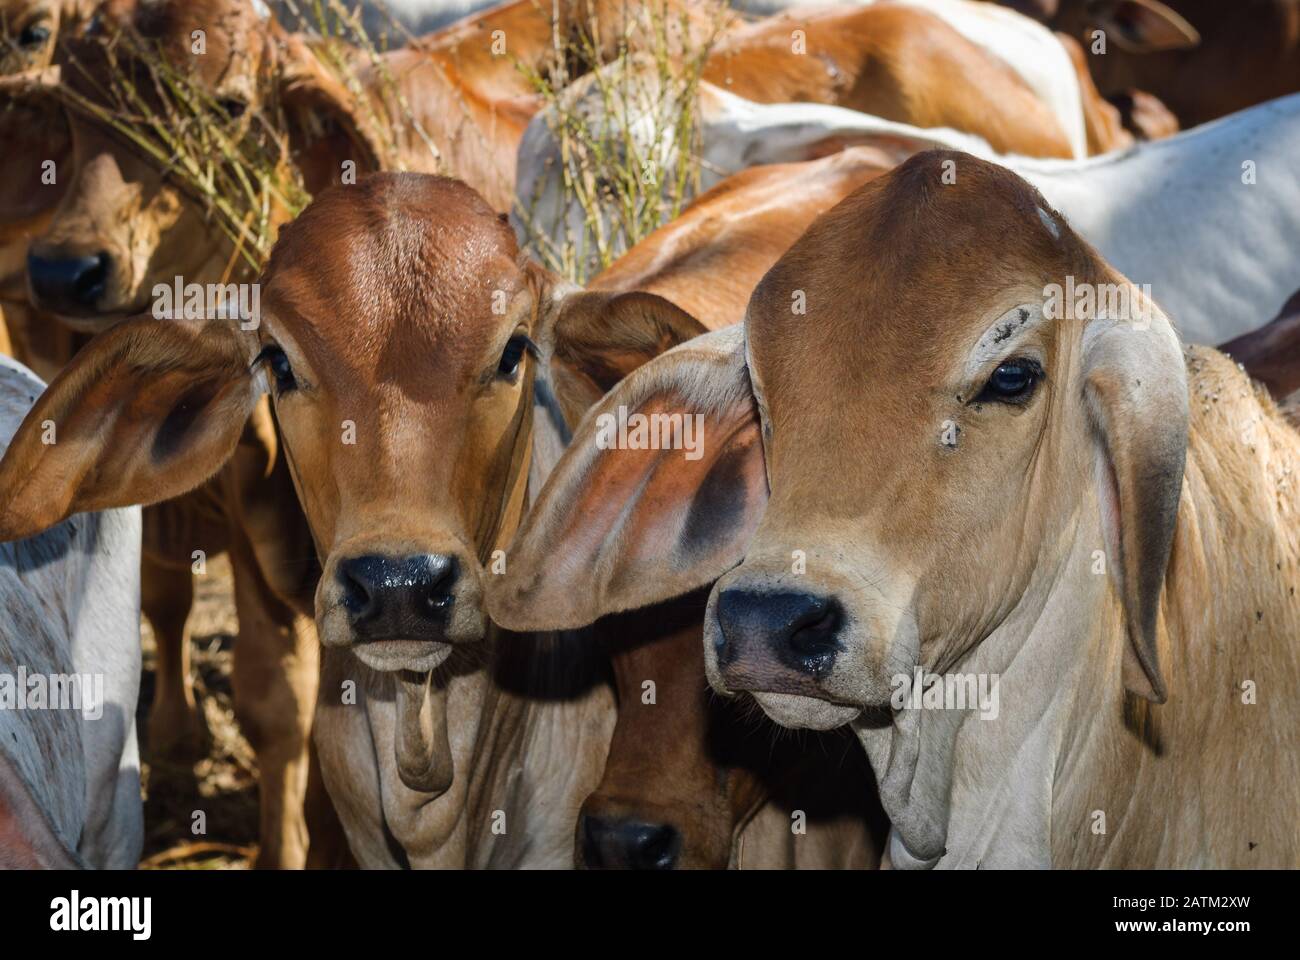 Brahman Cattle / Ho Brahmans Operated And Owned By Hauck Opitz Gbr